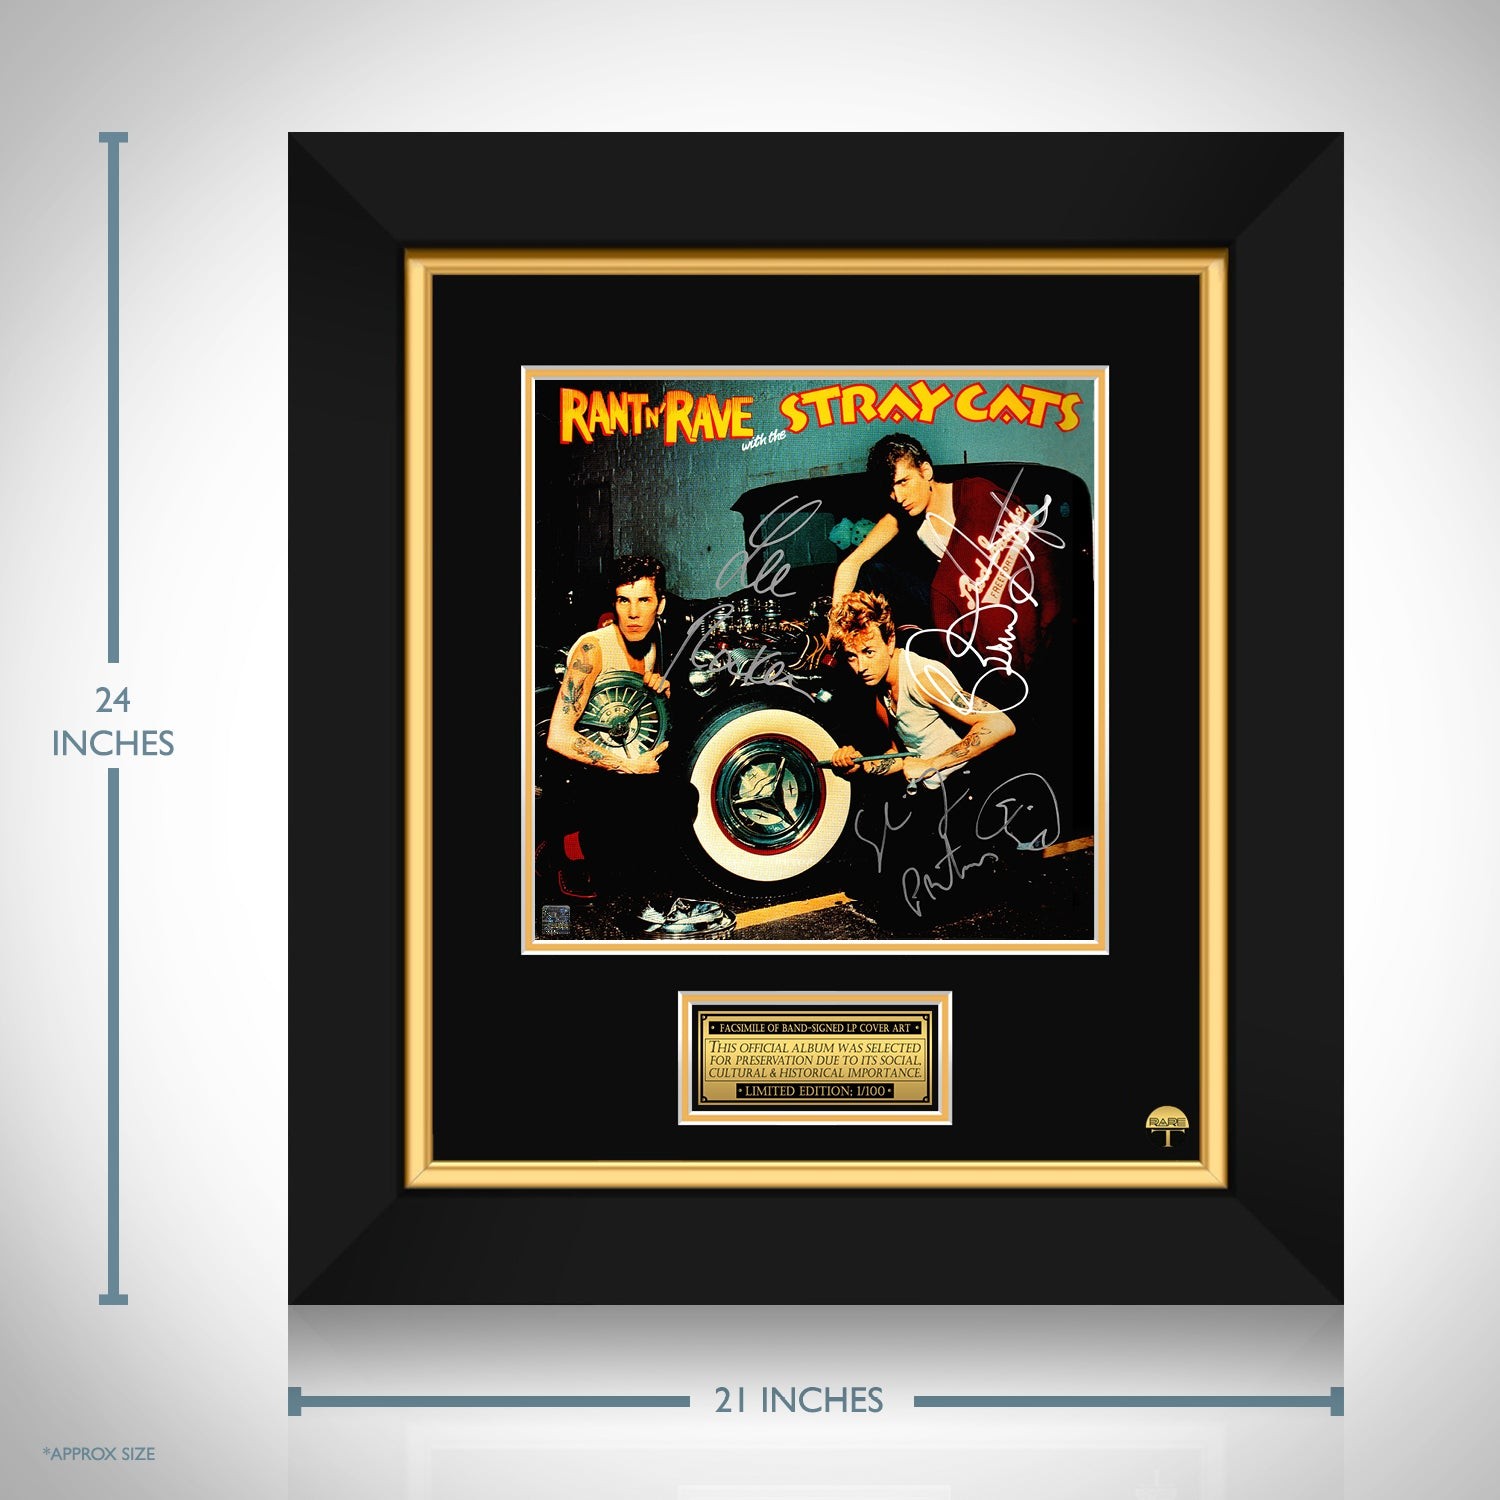 The Stray Cats - Rant N Rave LP Cover Limited Signature Edition Custom  Frame